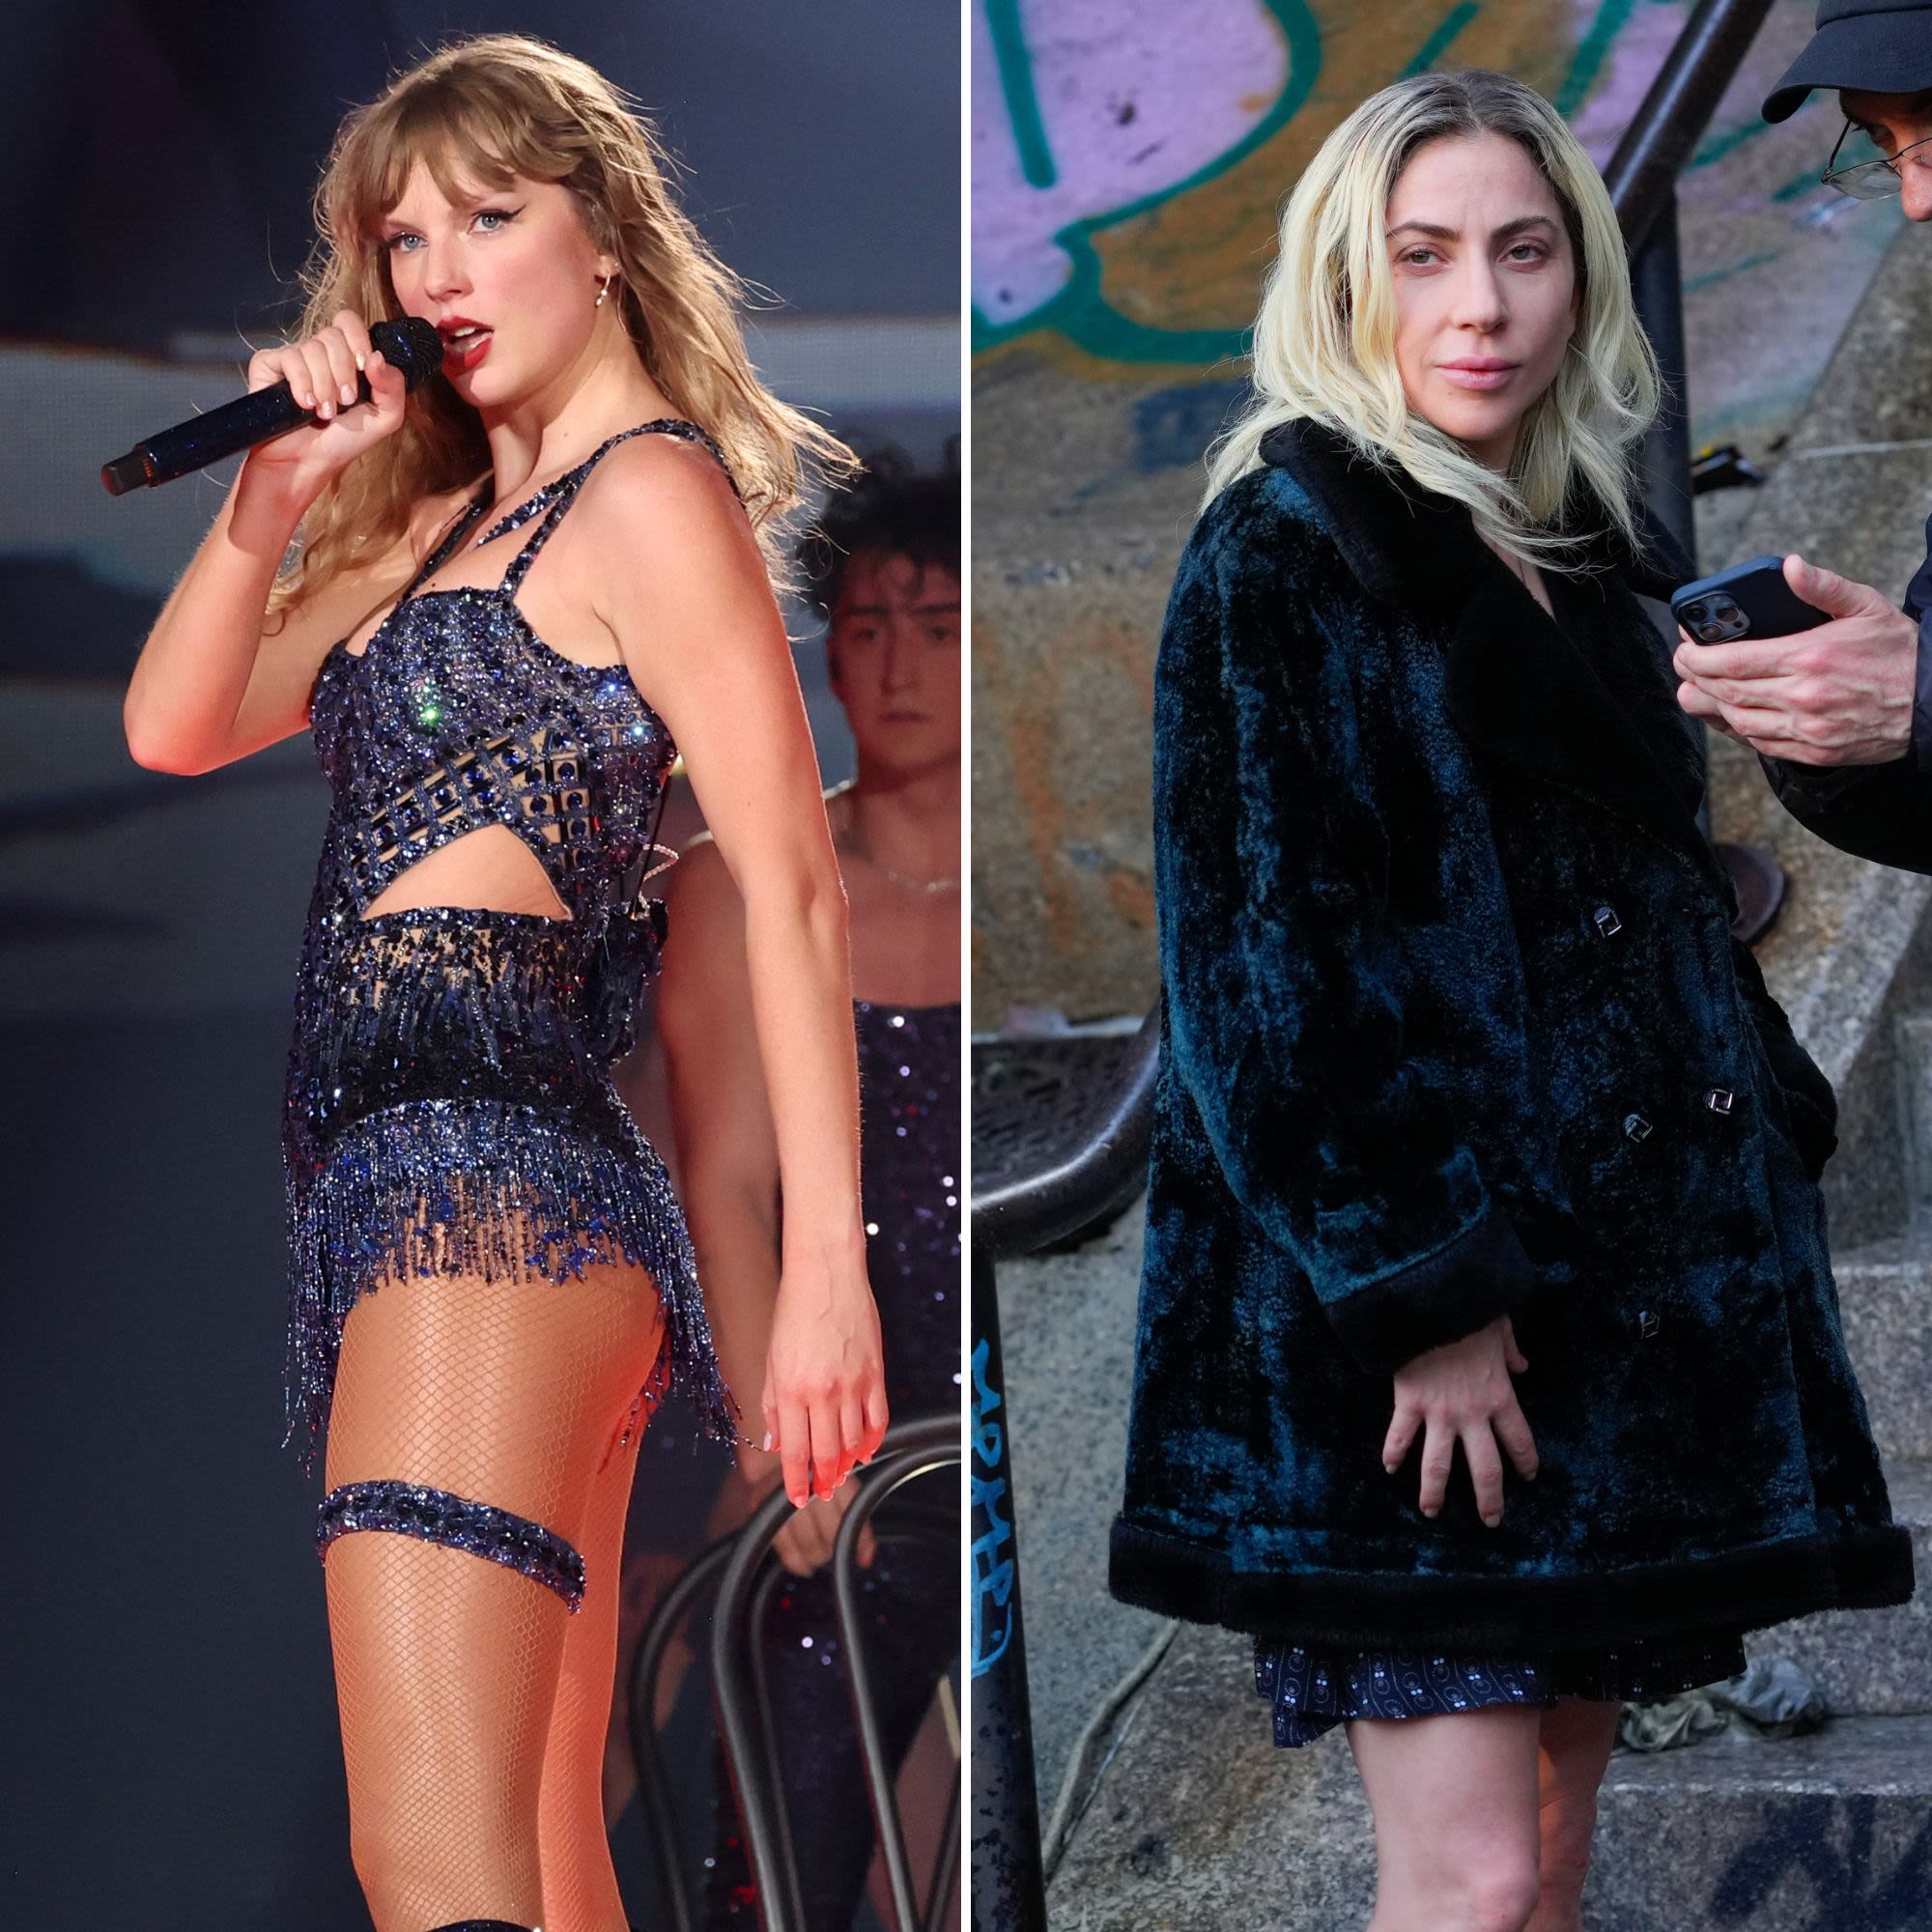 Taylor Swift Calls Pregnancy Speculation ‘Invasive and Irresponsible’ Amid Lady Gaga’s Denial